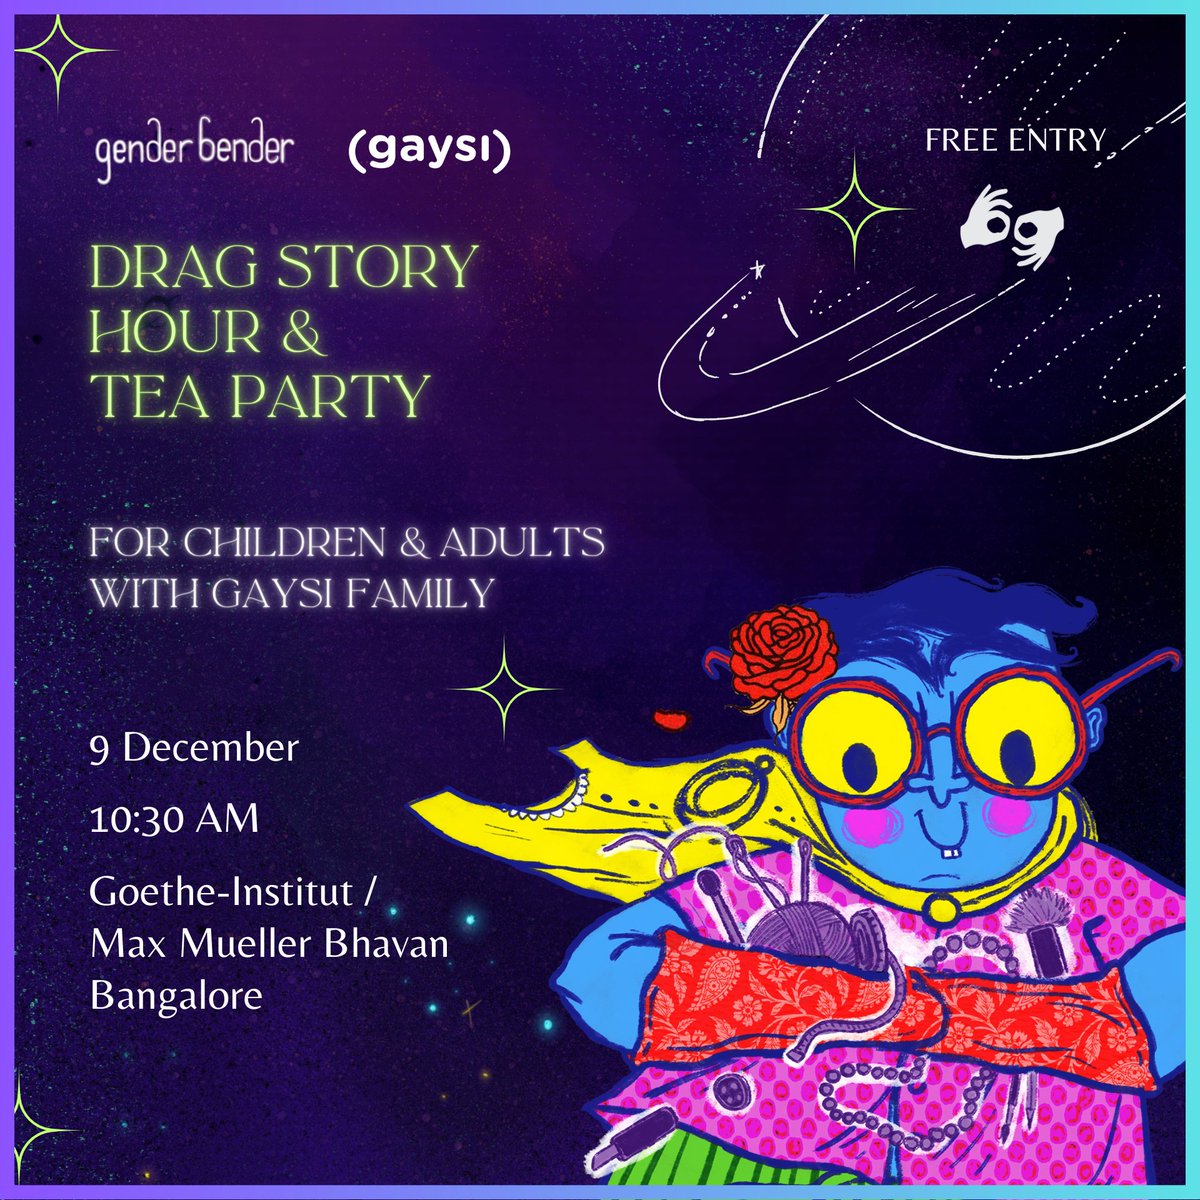 Gather your little ones and join us for Drag Story Hour & Tea Party with Gaysi Family! Princess Sayantika will be our special guest, and together, we will read “The Boy in the Cupboard” by Harshala Gupte, Illustrated by Priya Dali and 'The Many Colours of Anshu' by Anshumaan.